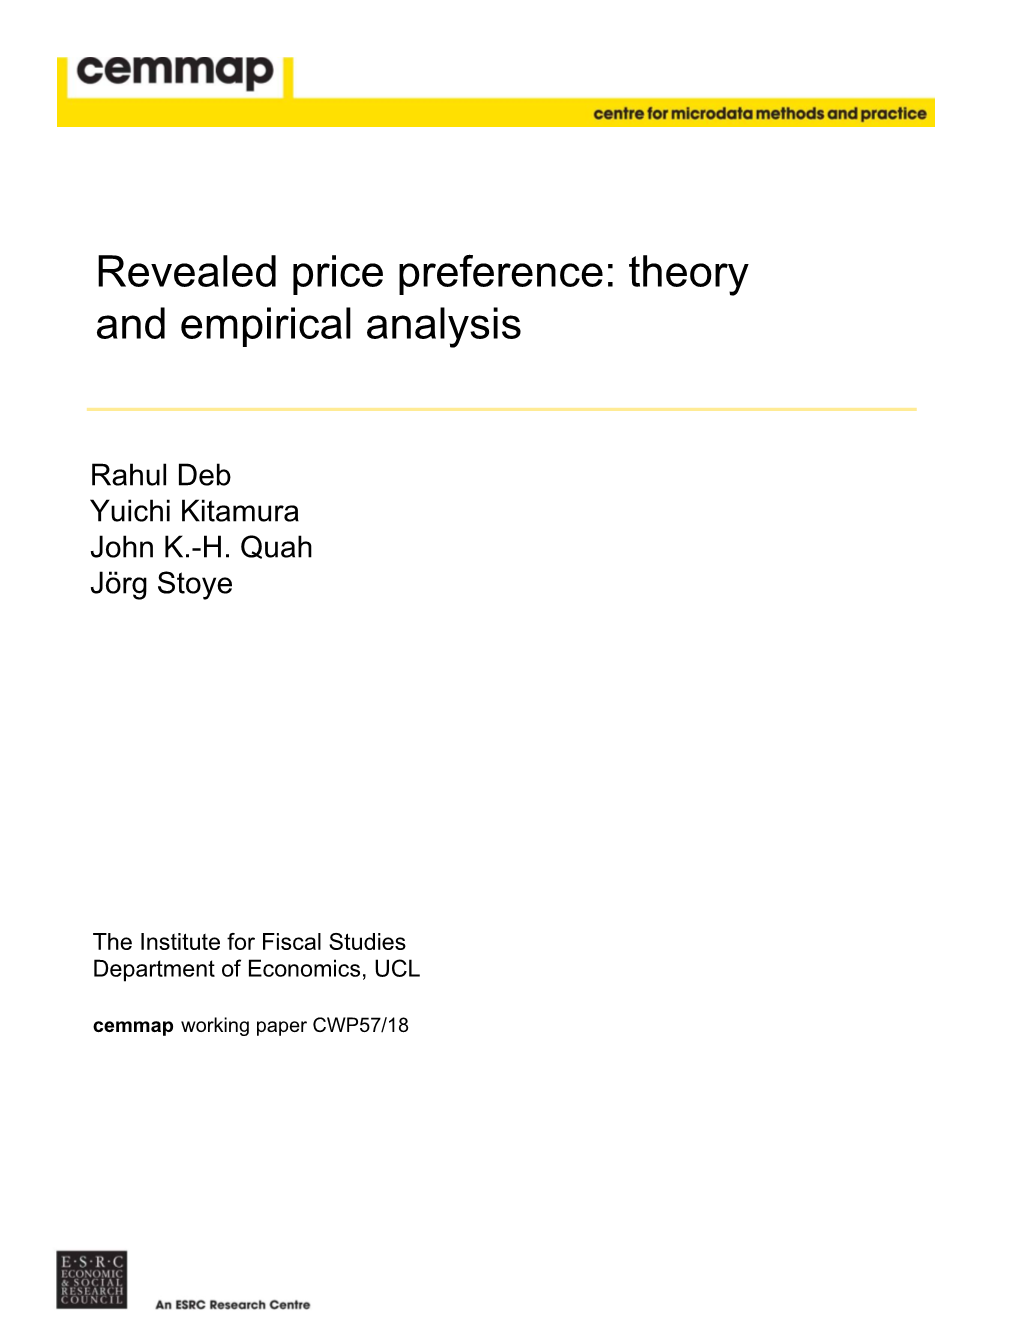 Revealed Price Preference: Theory and Empirical Analysis